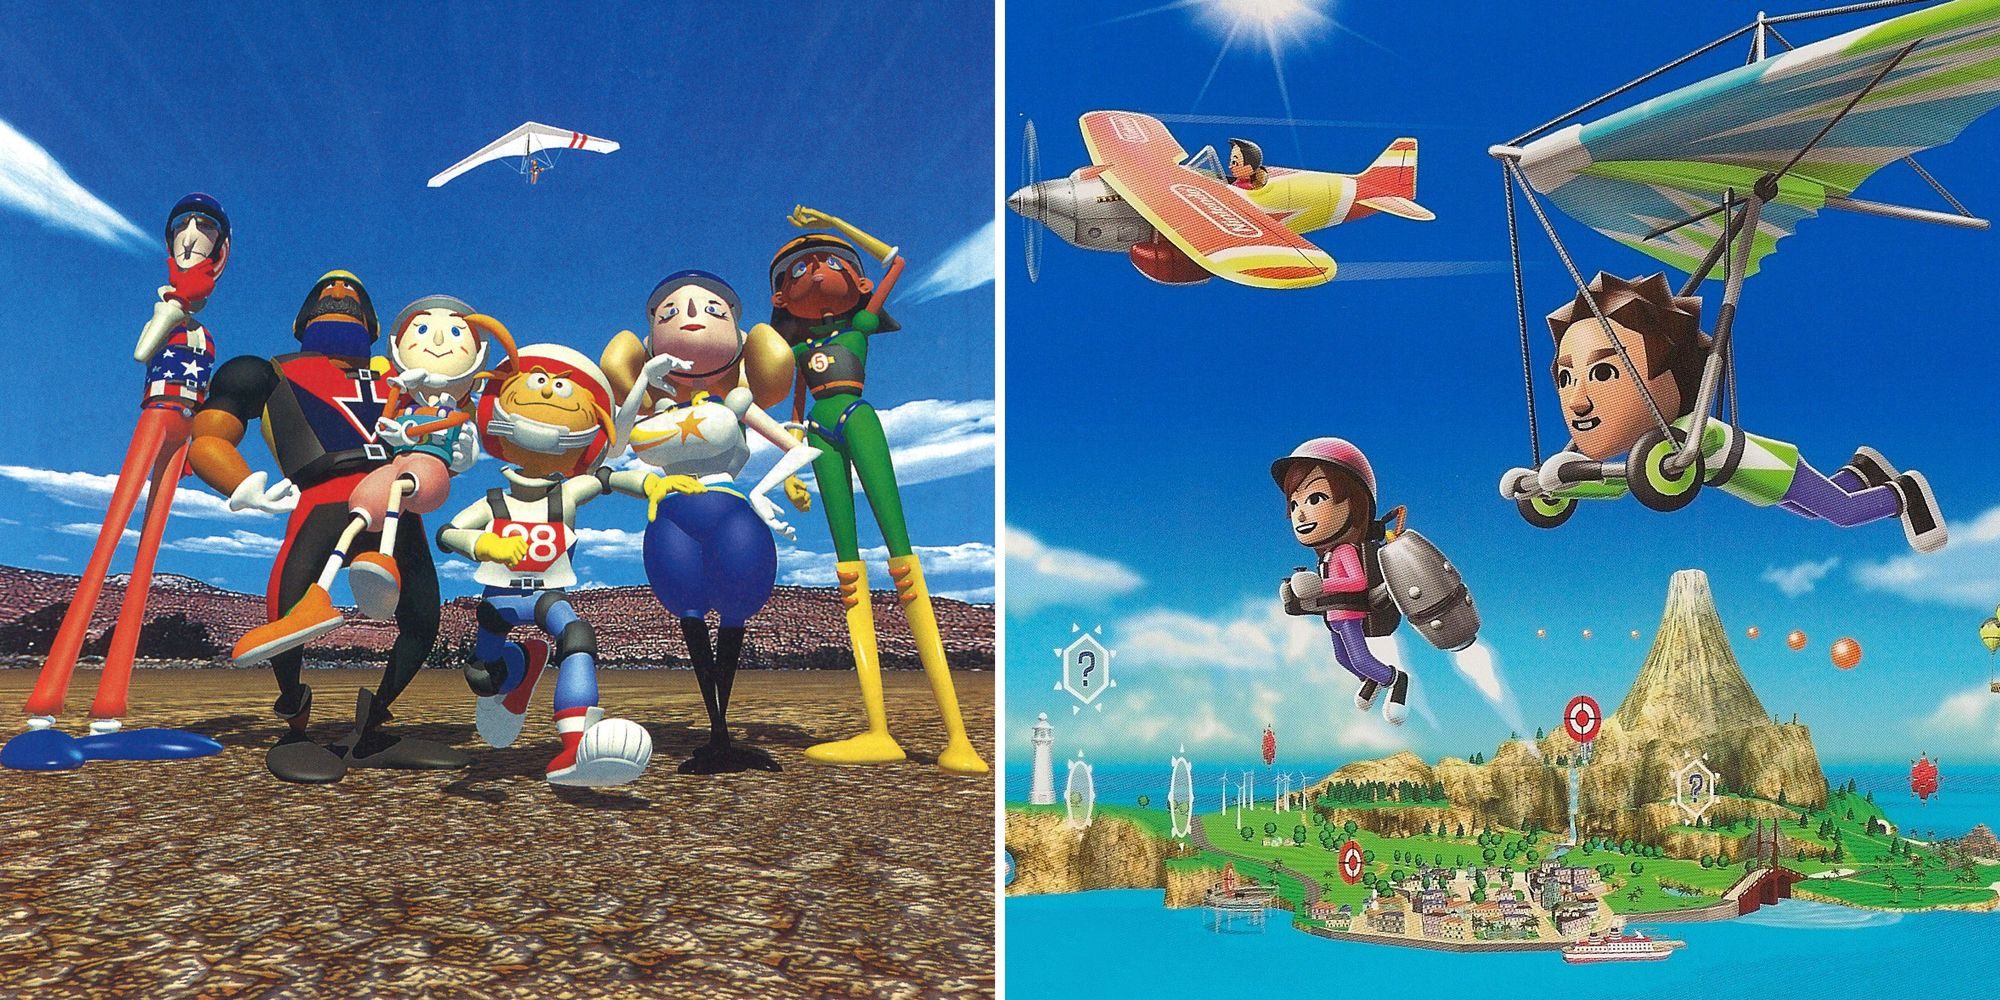 sequels-pilotwings-64-and-pilotwings-resort-6545707